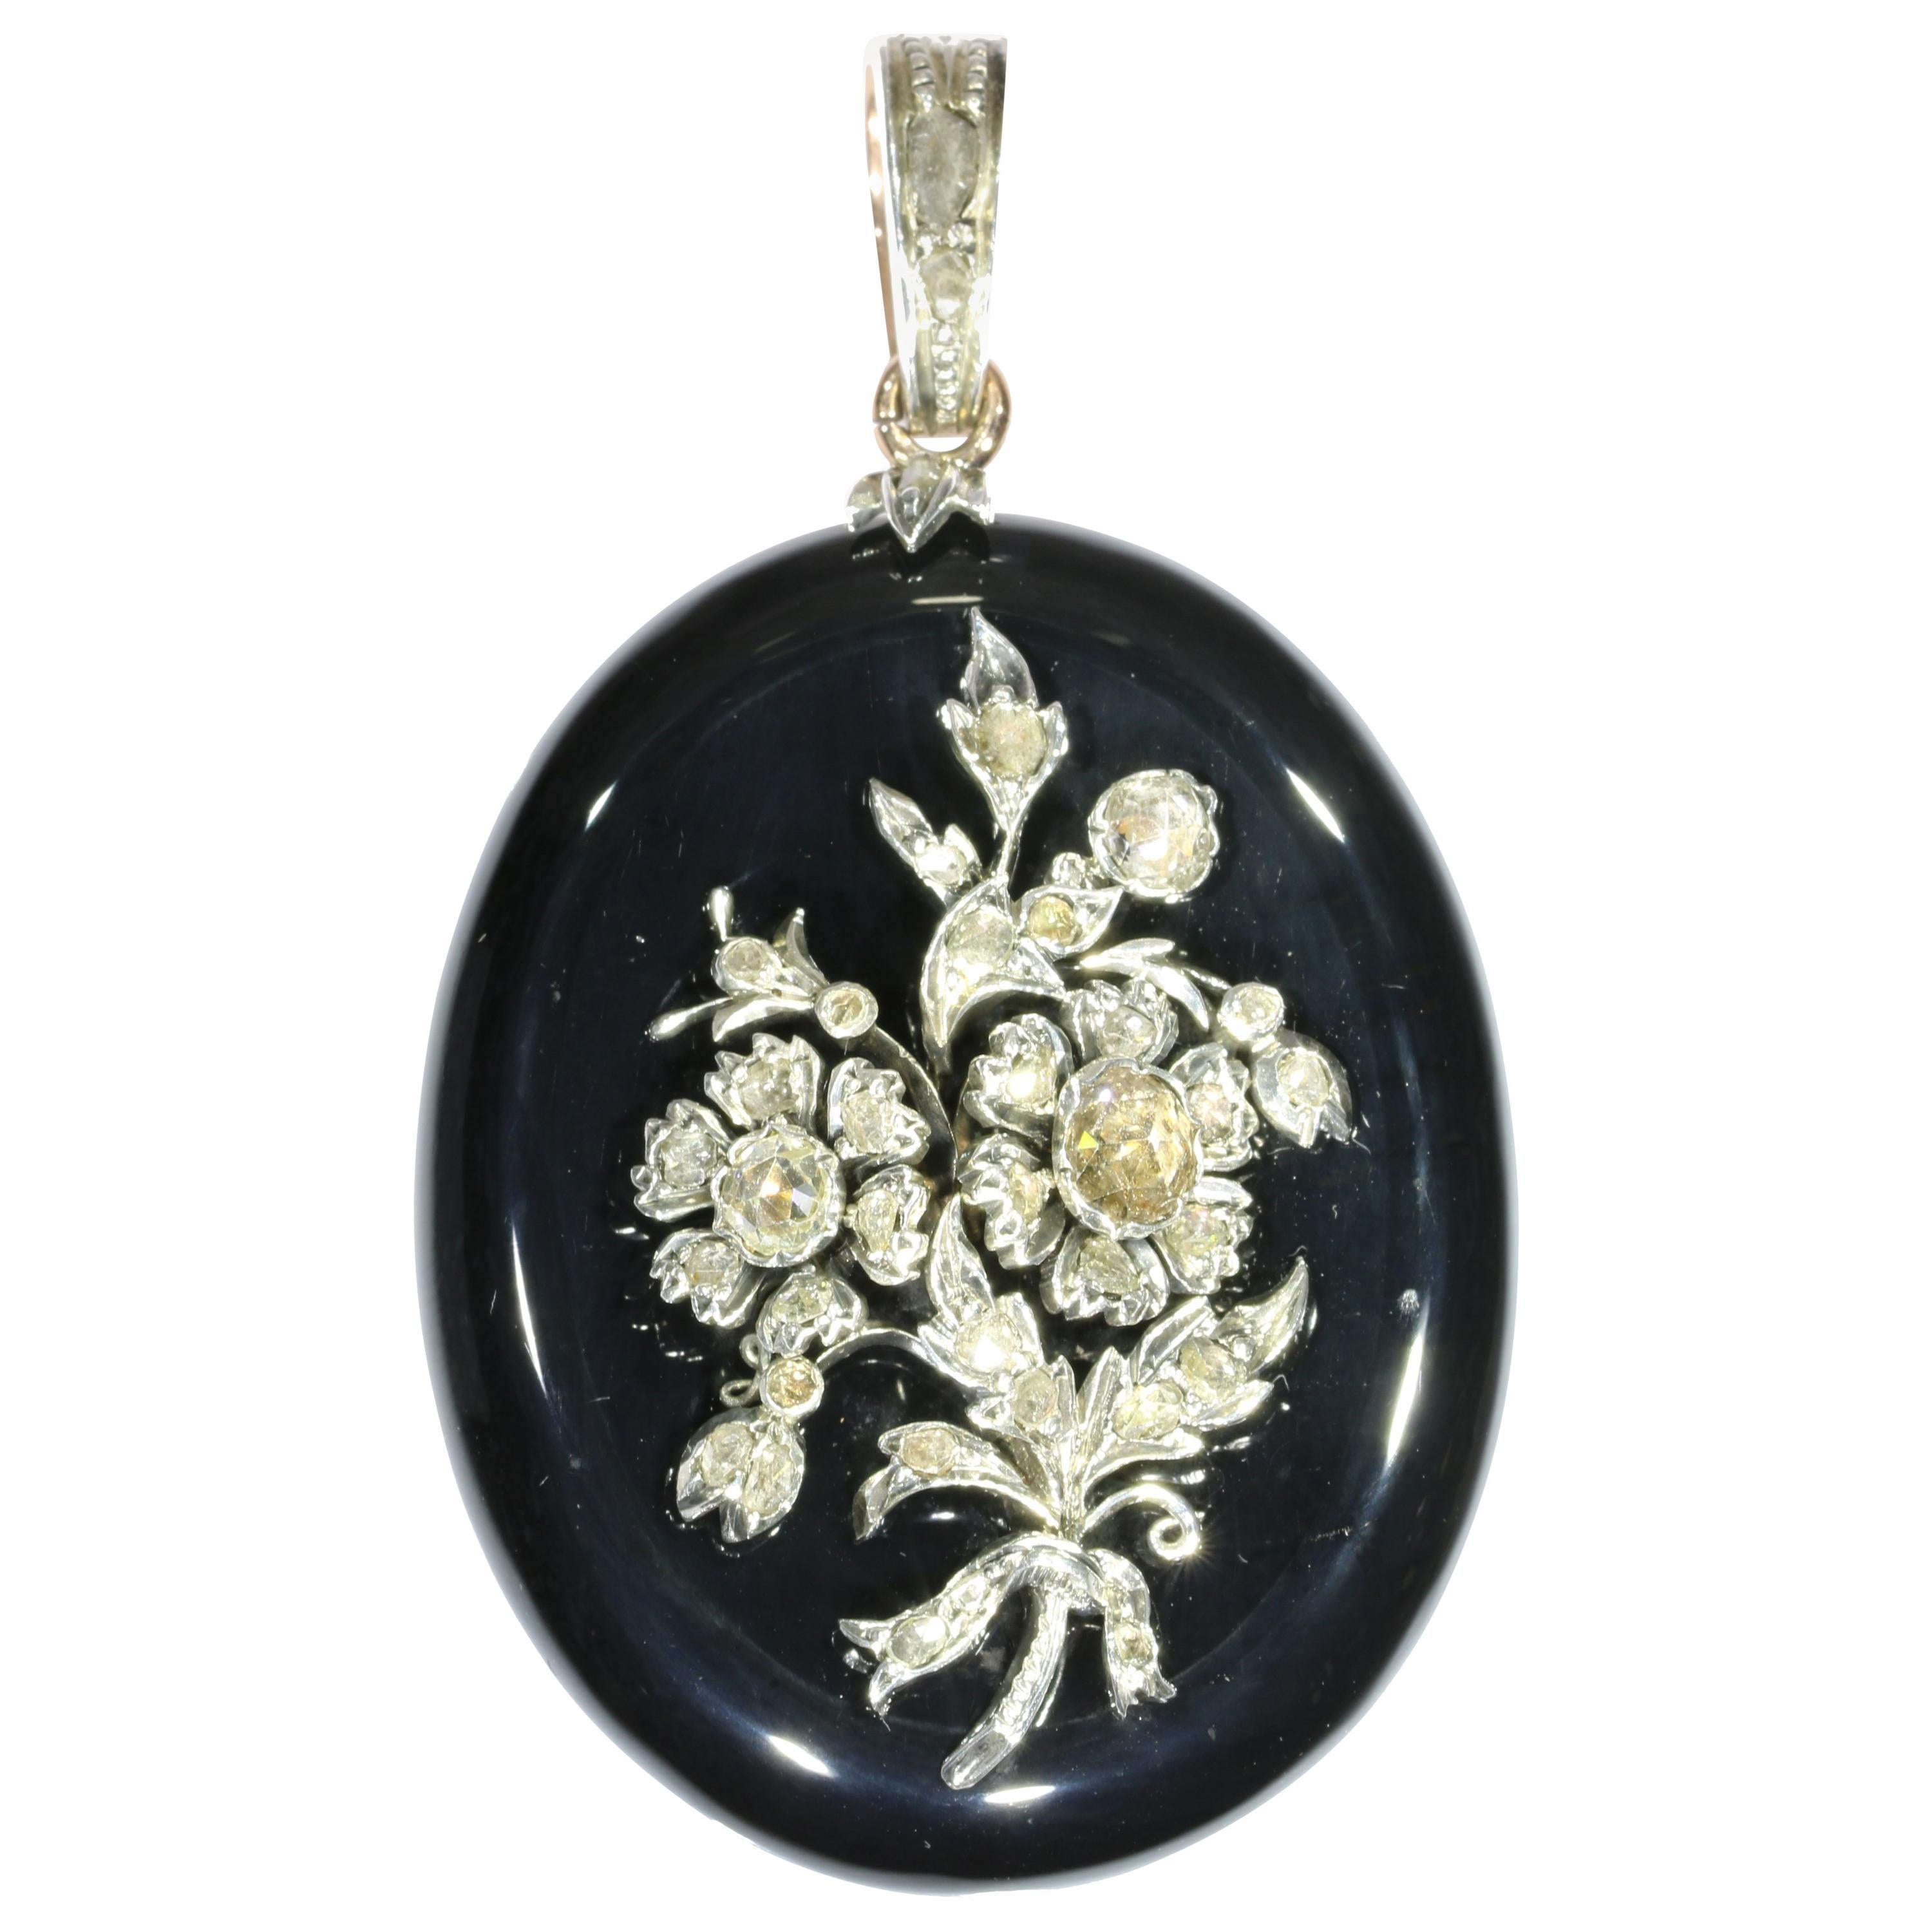 Antique Victorian Onyx Locket Pendant with Diamond Loaded Bouquet on Top For Sale